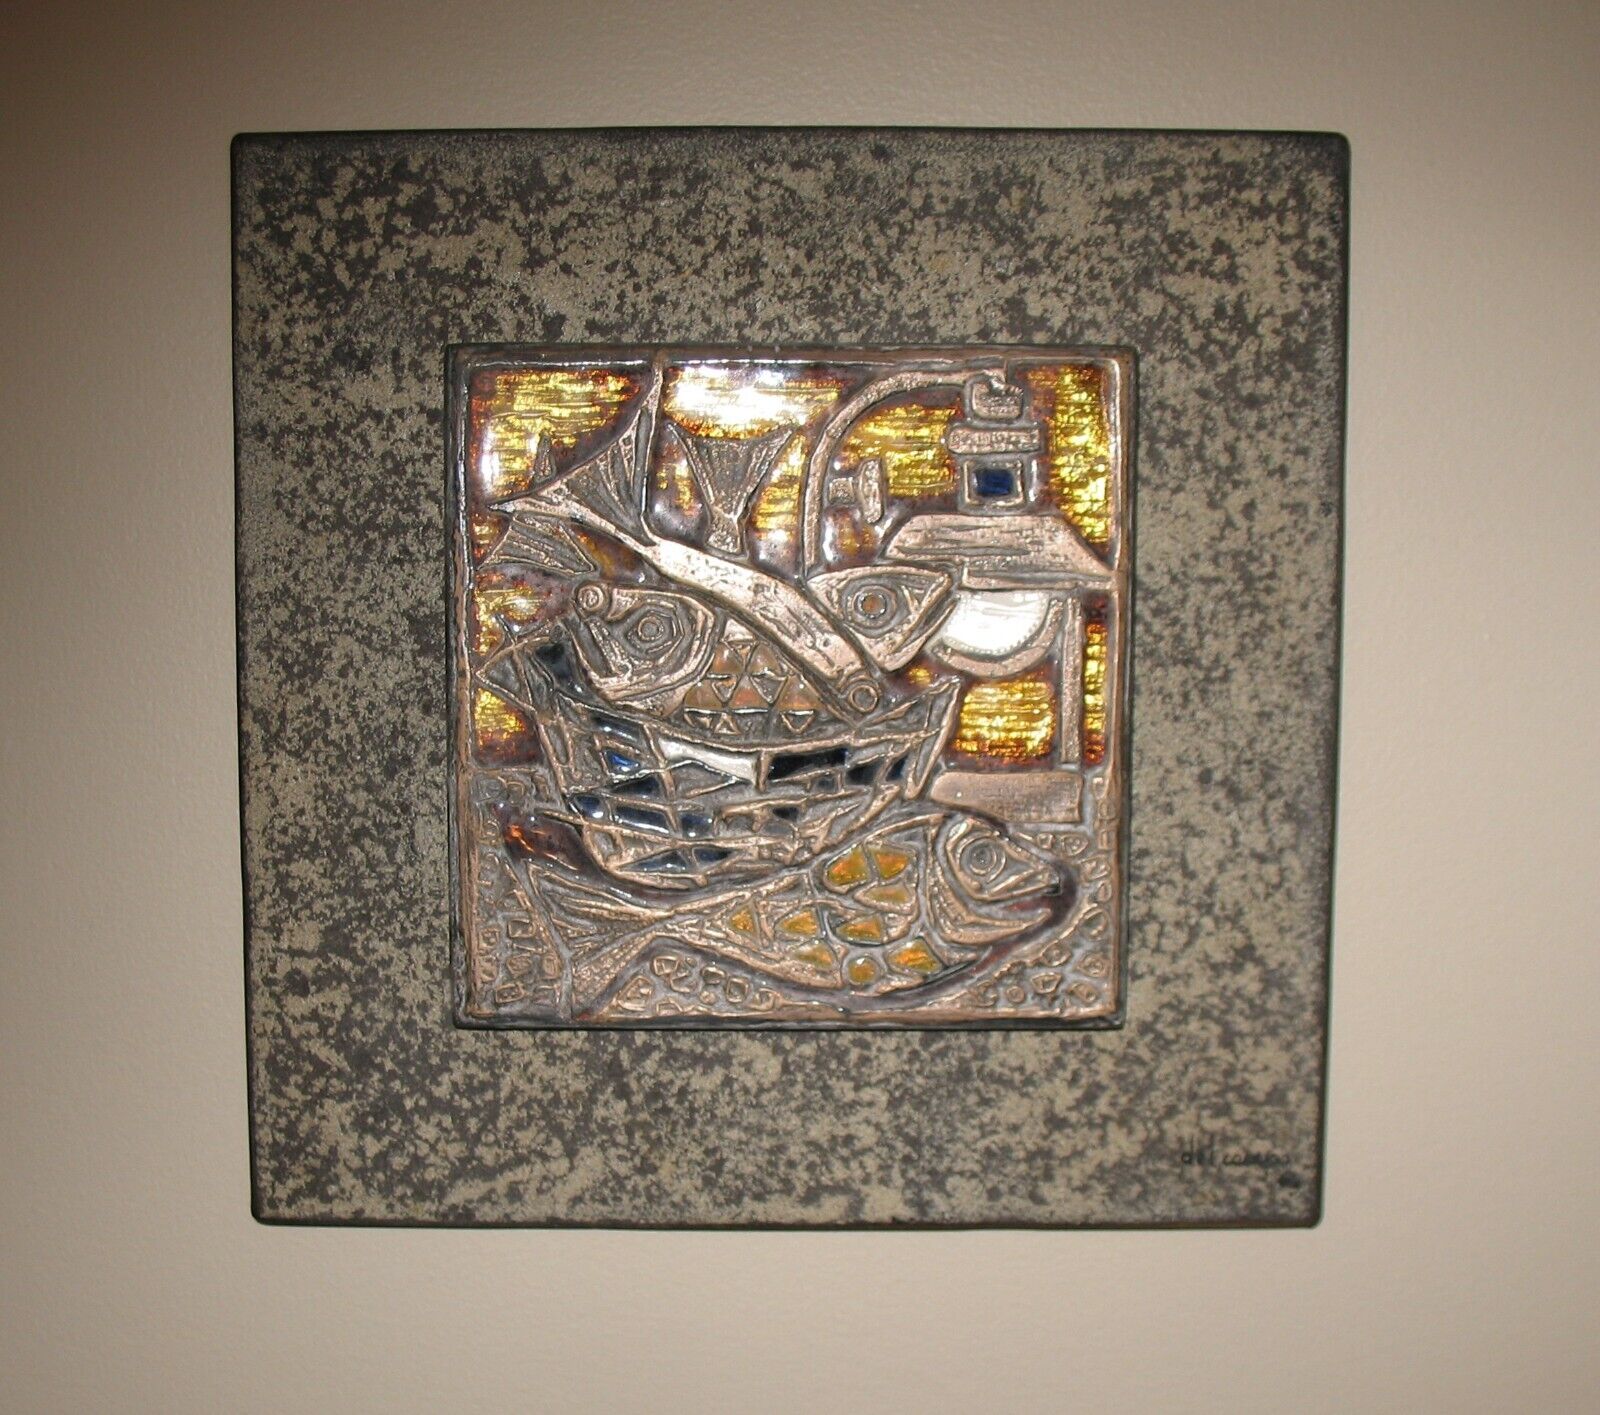 STUDIO DEL CAMPO 1964 ENAMELED BRONZE 3D WALL PLAQUE & RAISED TILE TURIN ITALY